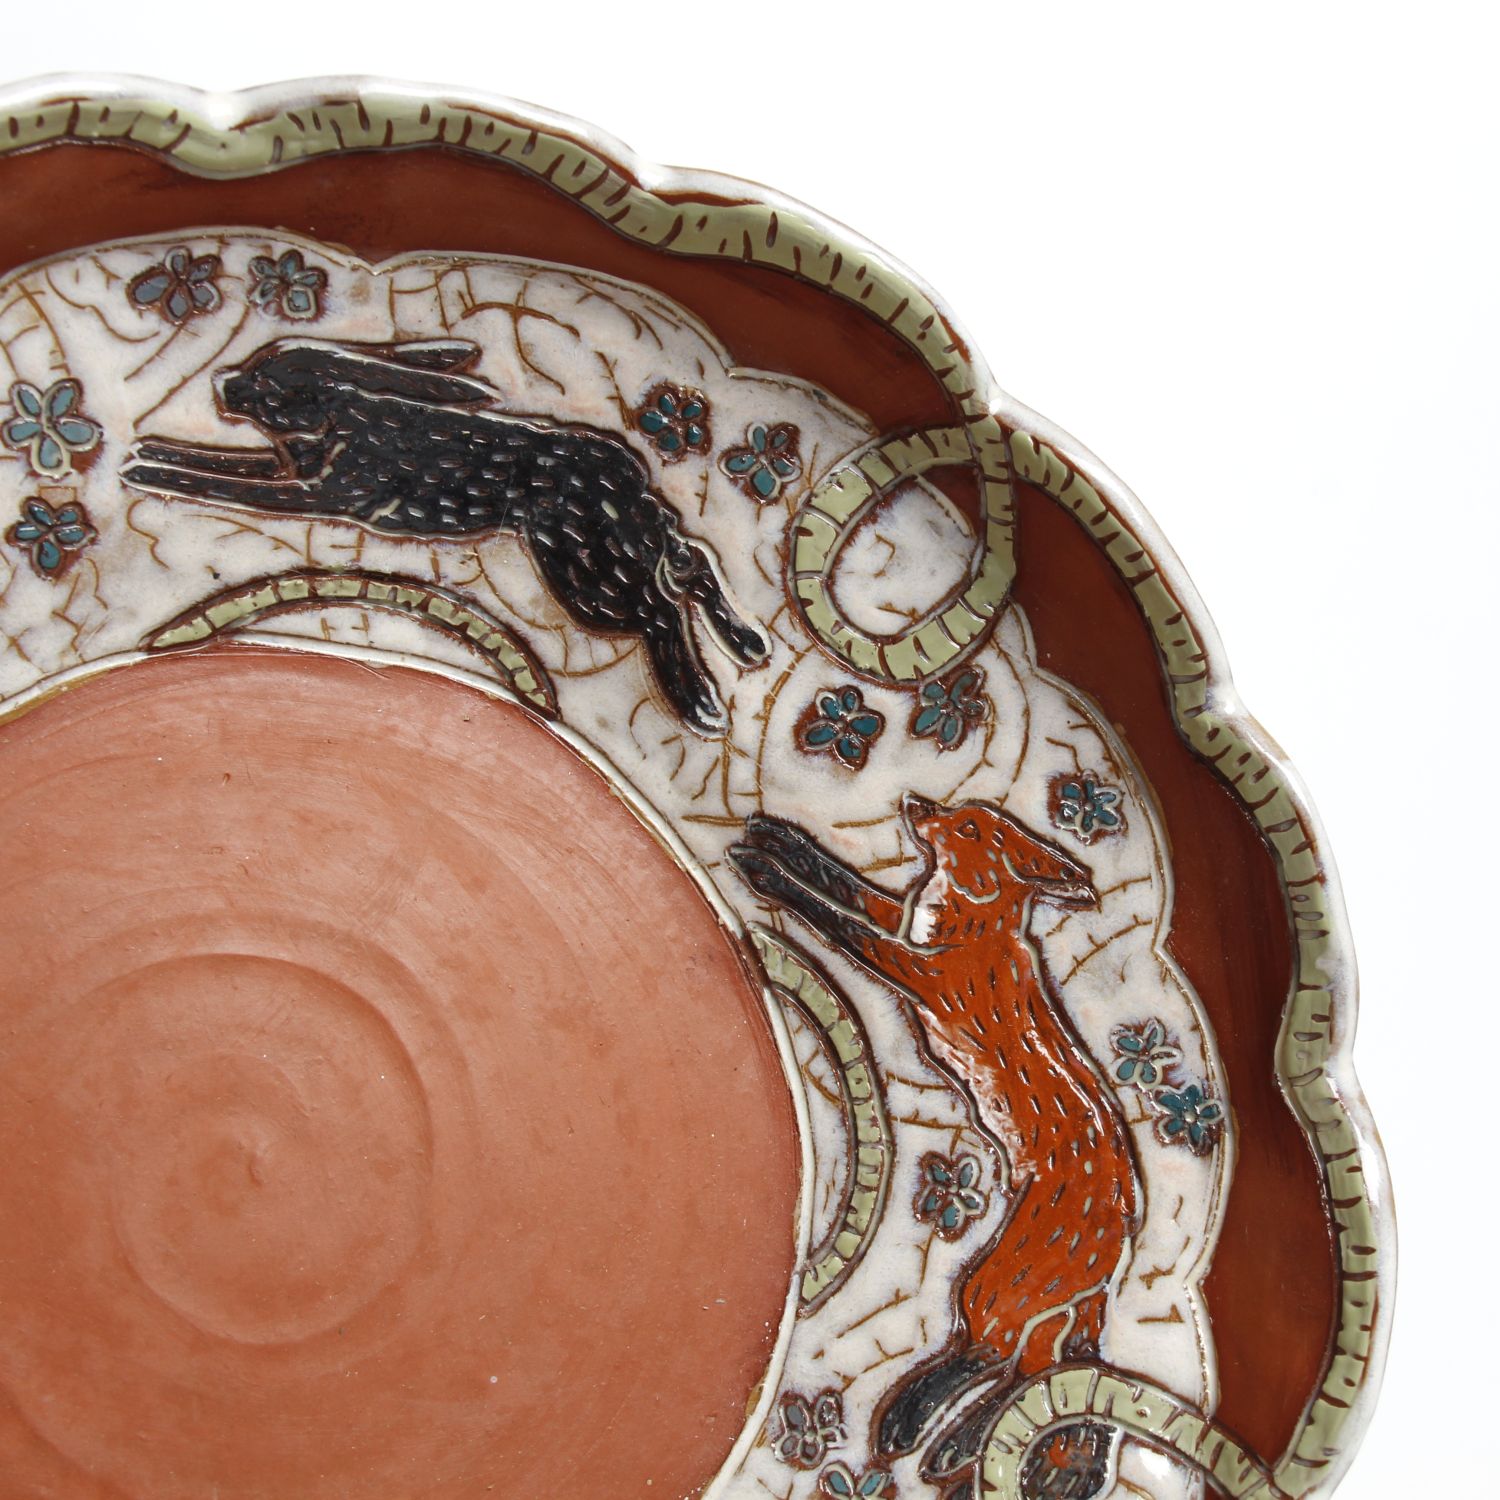 Zoe Pinnell: Fox Serving Bowl Product Image 4 of 4